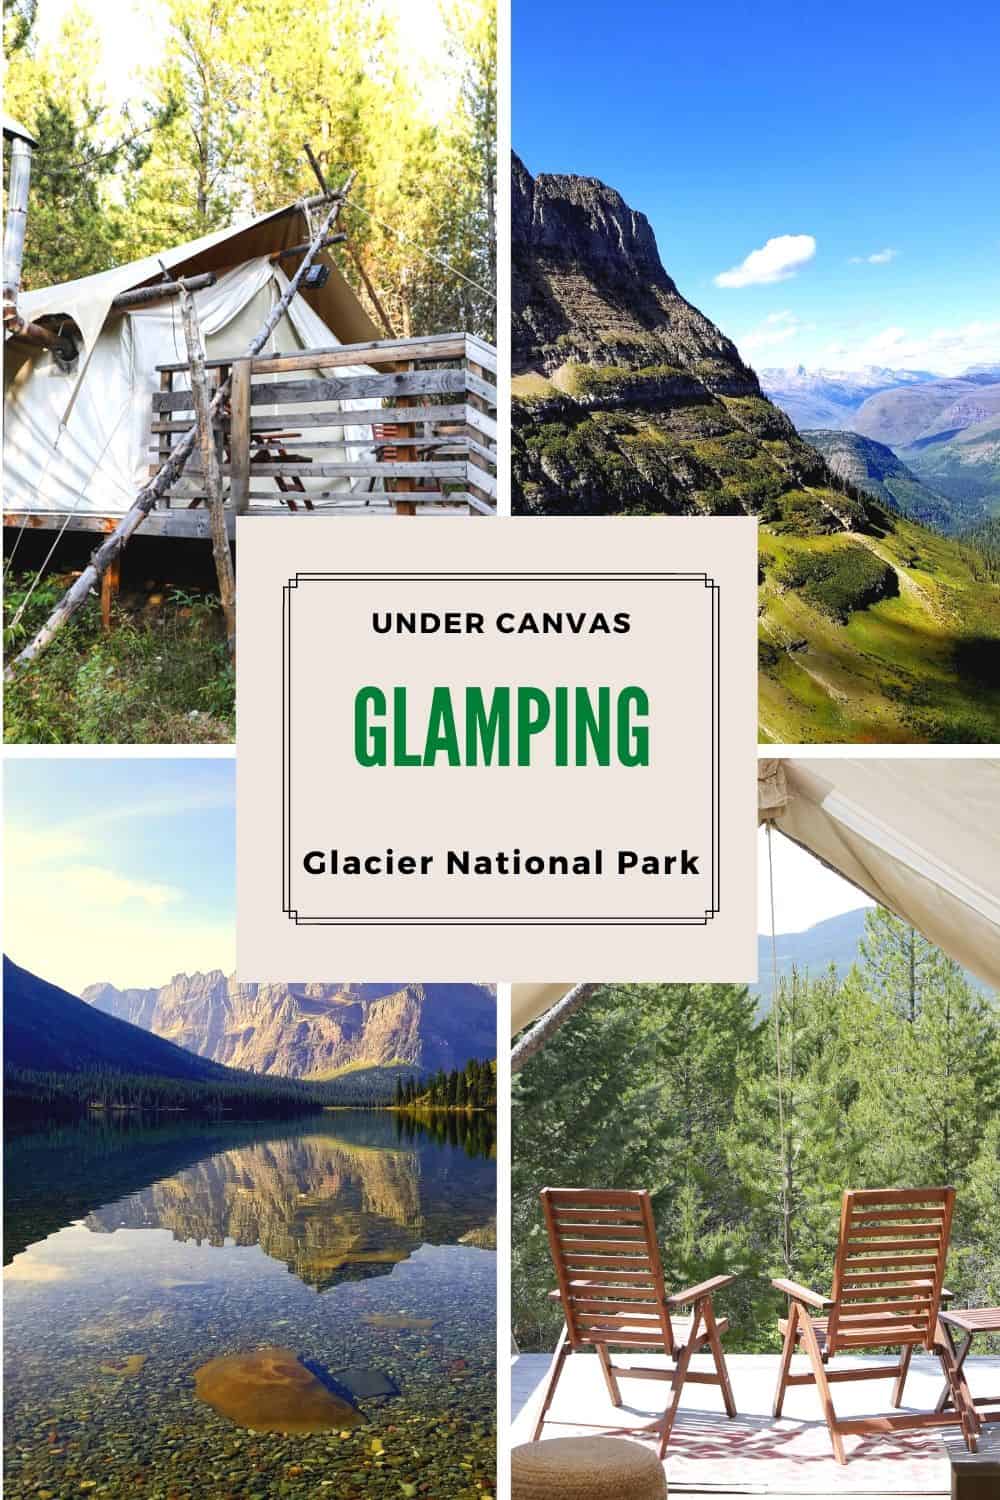 Looking for a unique home base for your Glacier National Park adventure? Book a stay at Under Canvas Glamping Glacier National Park